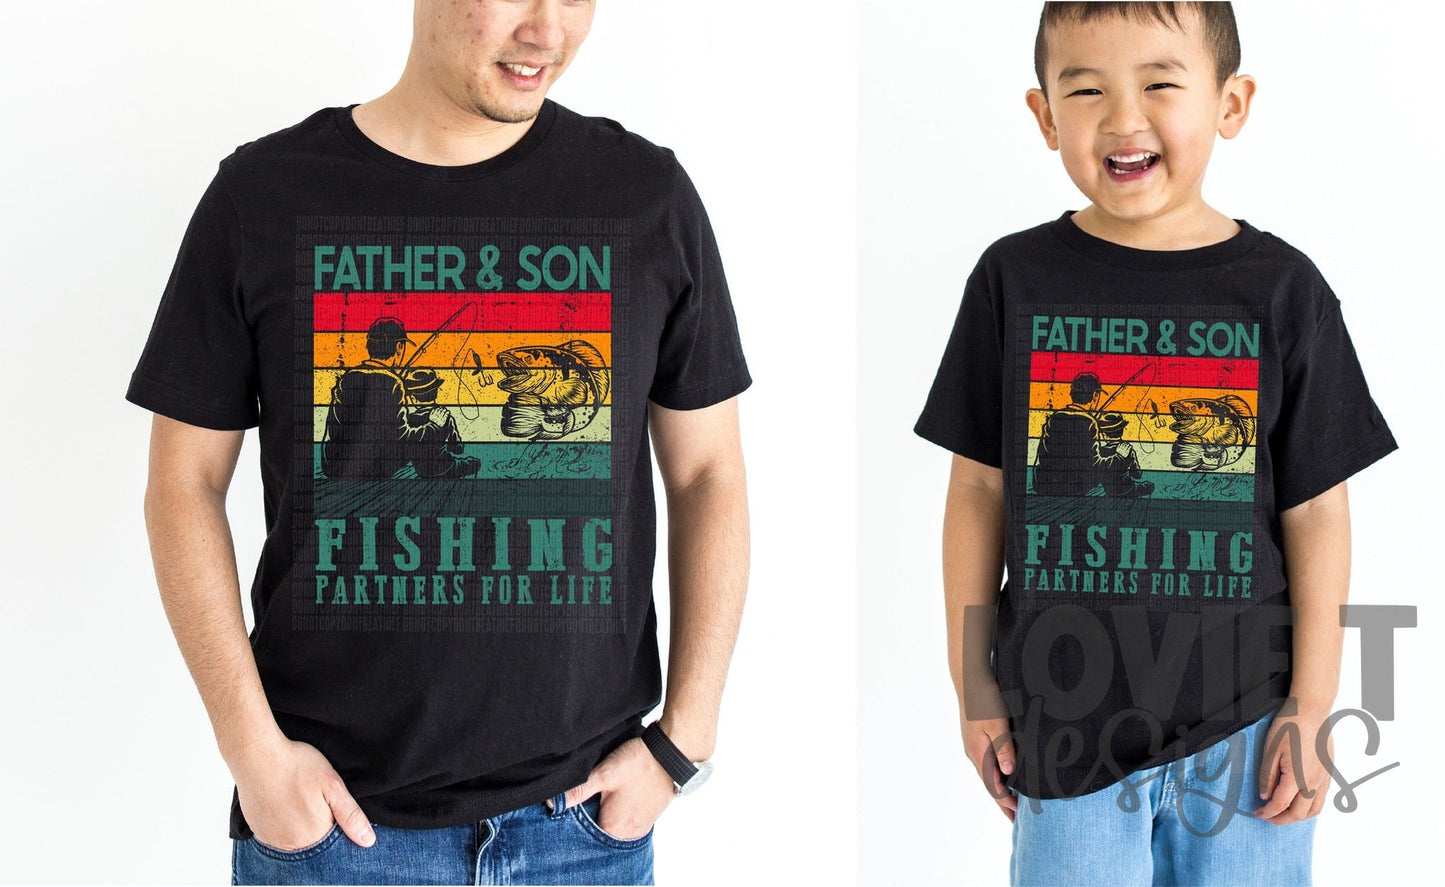 Father & Son Fishing Partners For Life